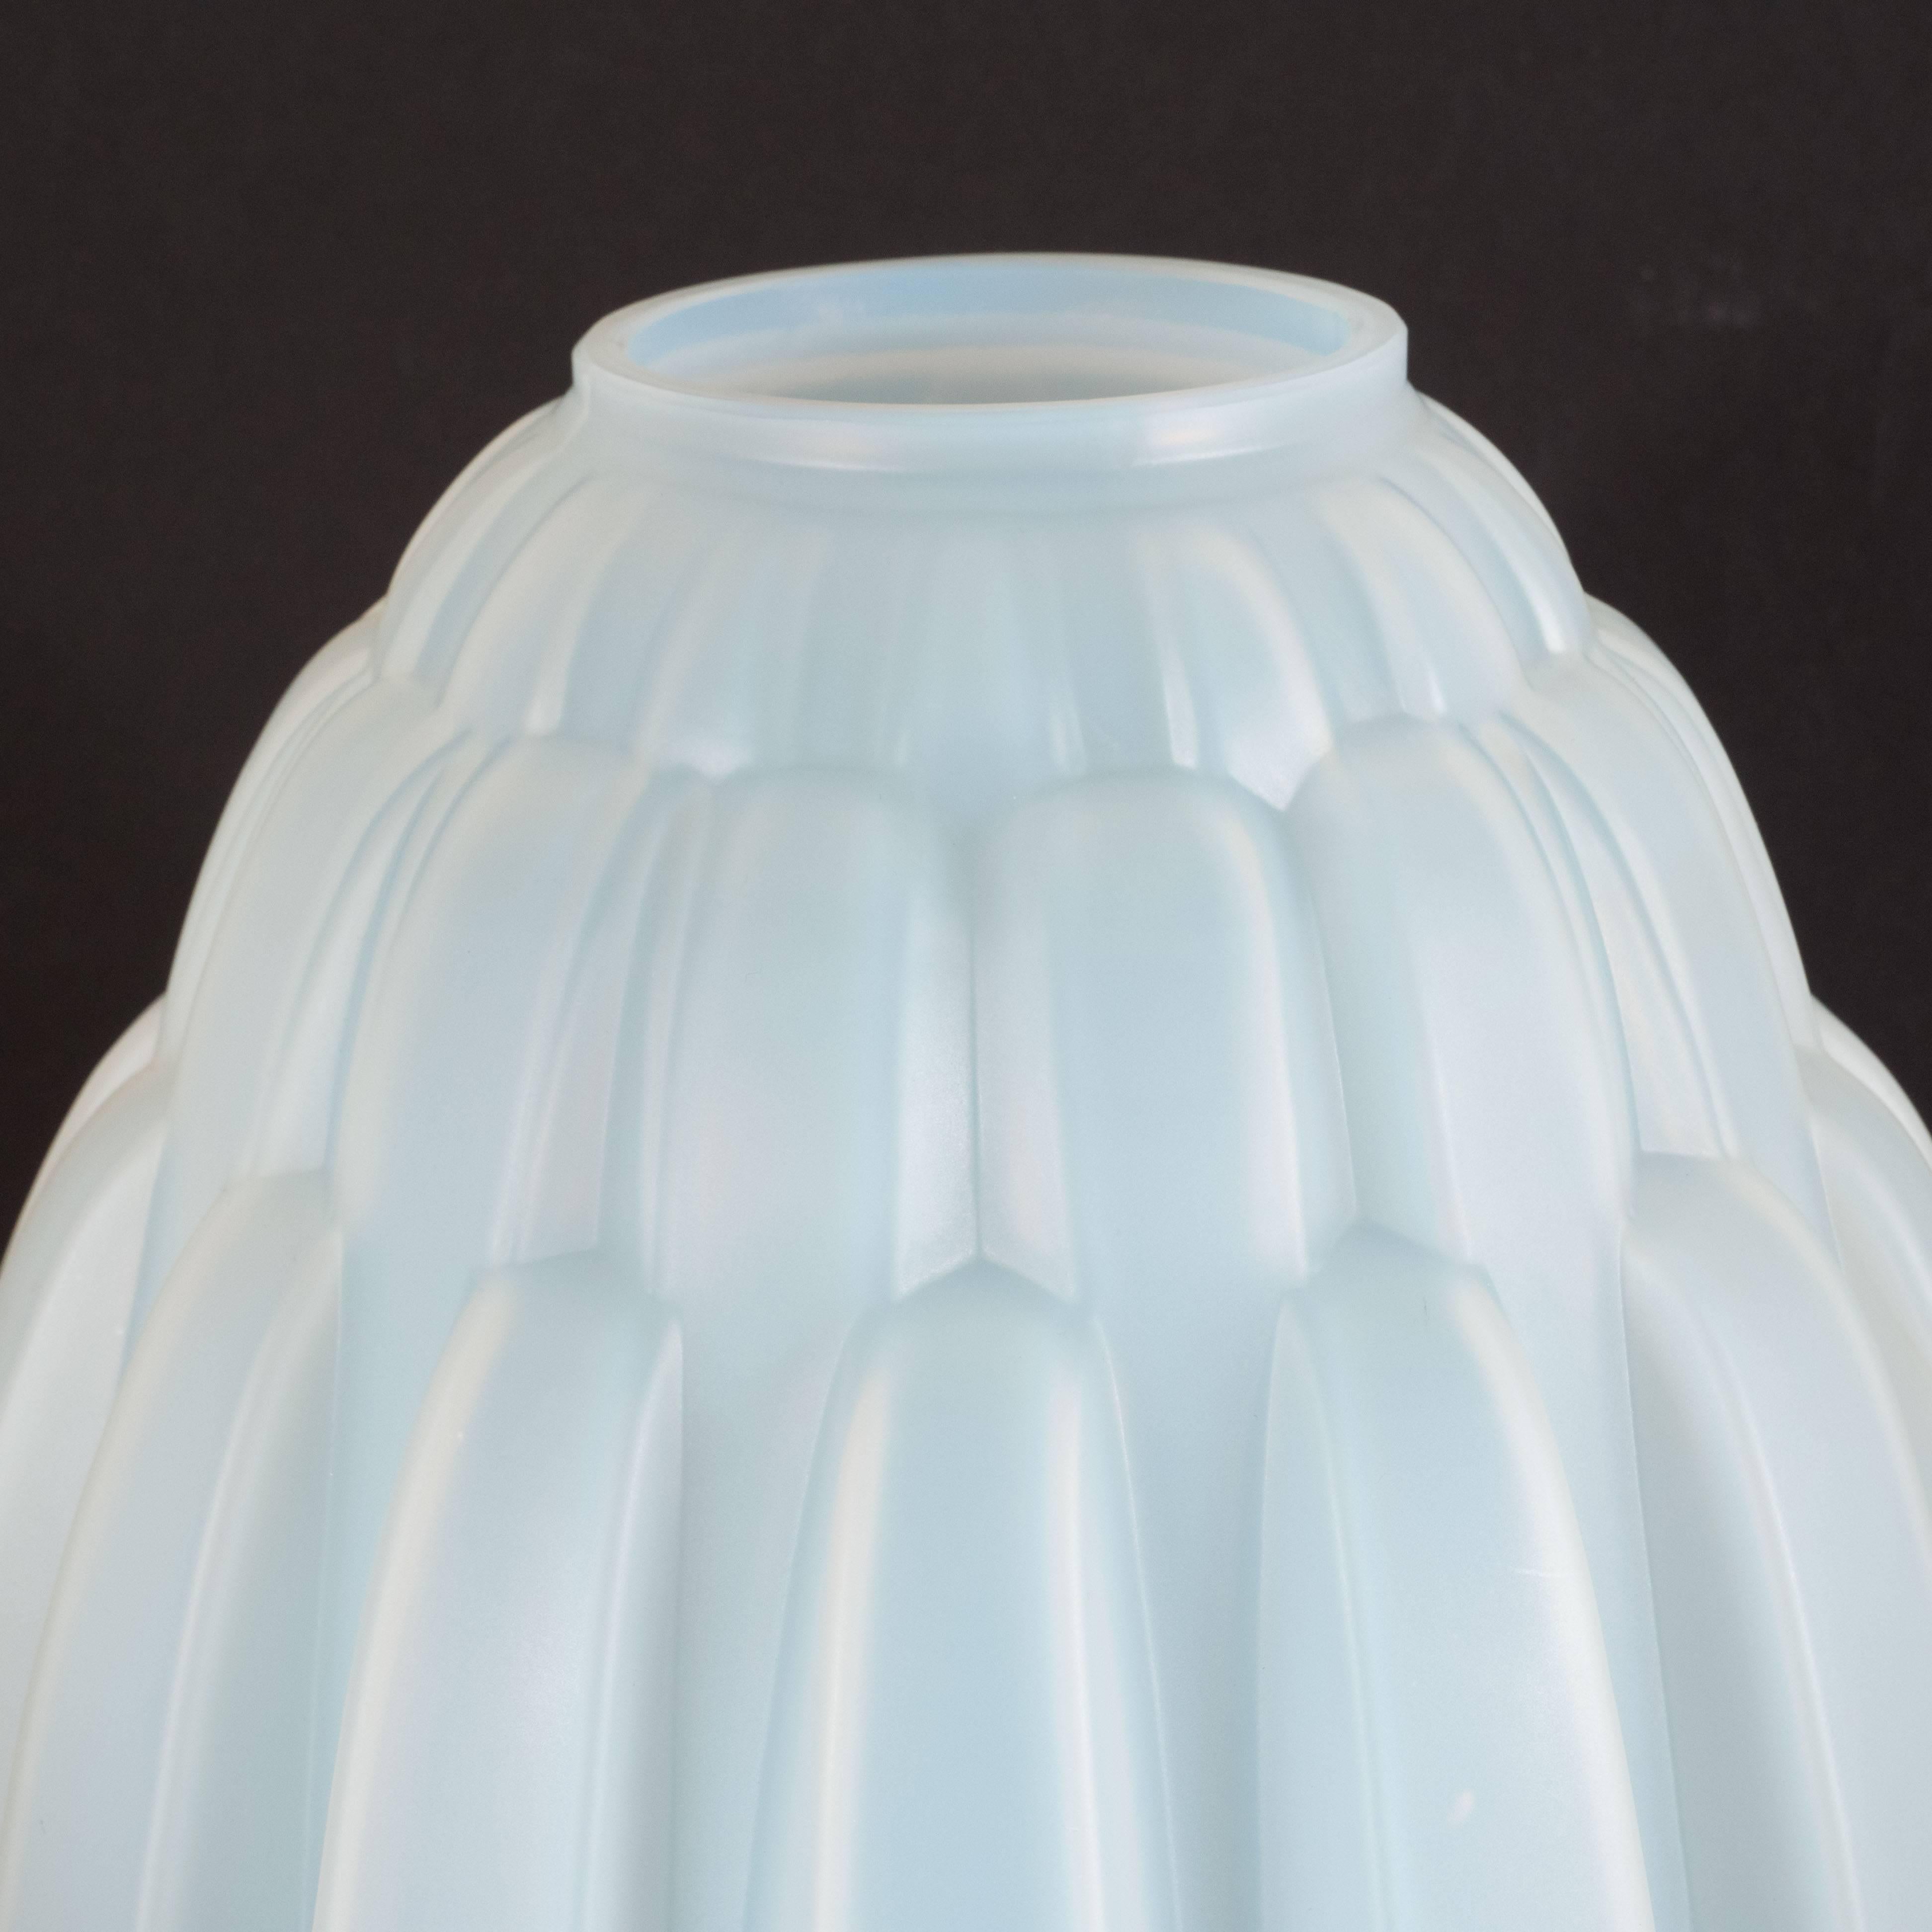 This gorgeous skyscraper style vase was hand blown by Andre Hunebelle- one of the most esteemed glass ateliers of the period- in France, circa 1930. It features a conical body inscribed with abundance of tiered streamlined bands in relief, as well